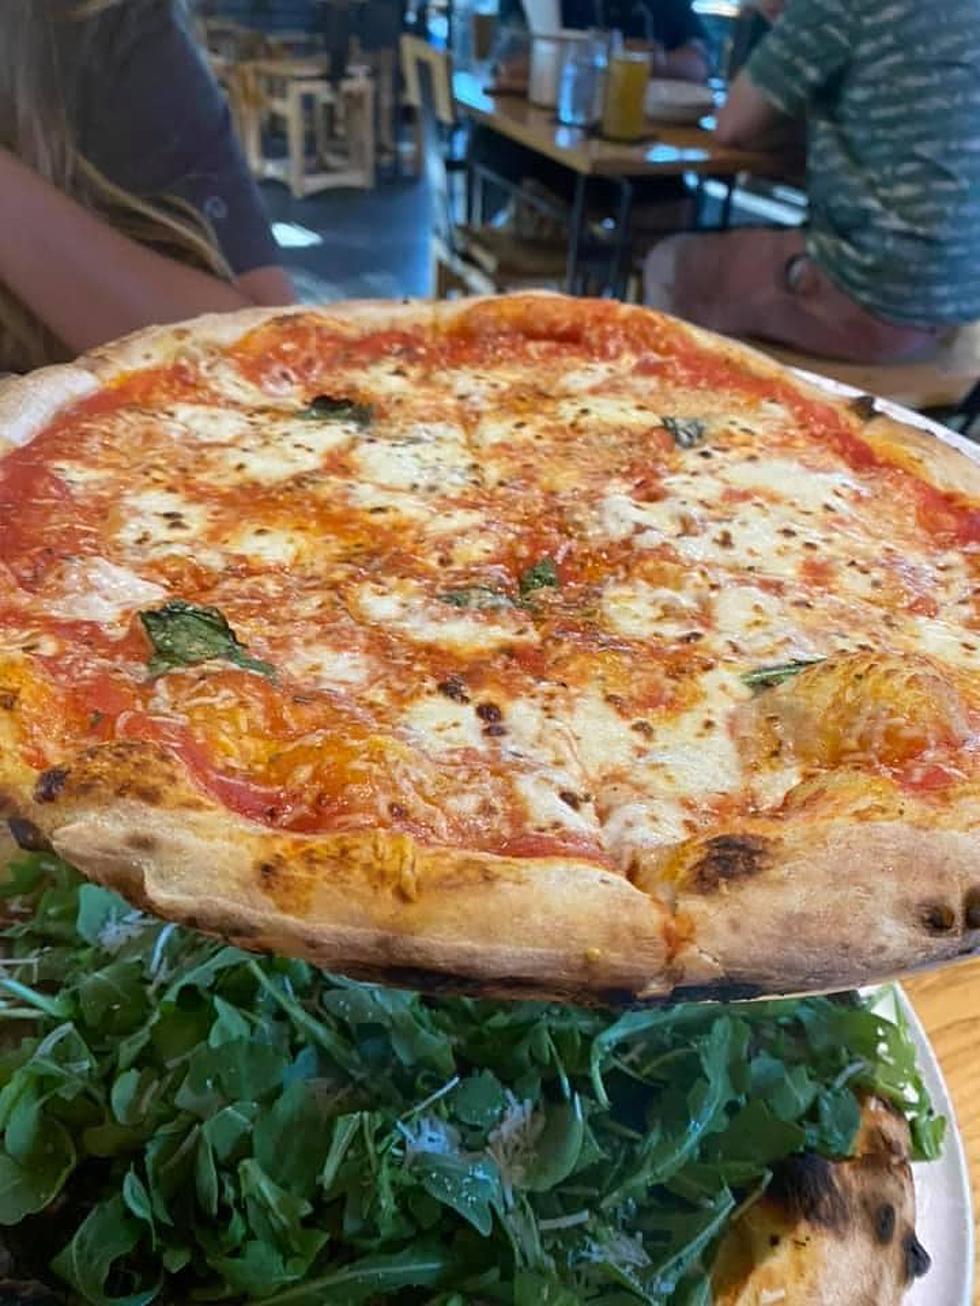 Many Go to Maine For the Seafood, But Have You Tried the Amazing Pizza at When Pigs Fly?